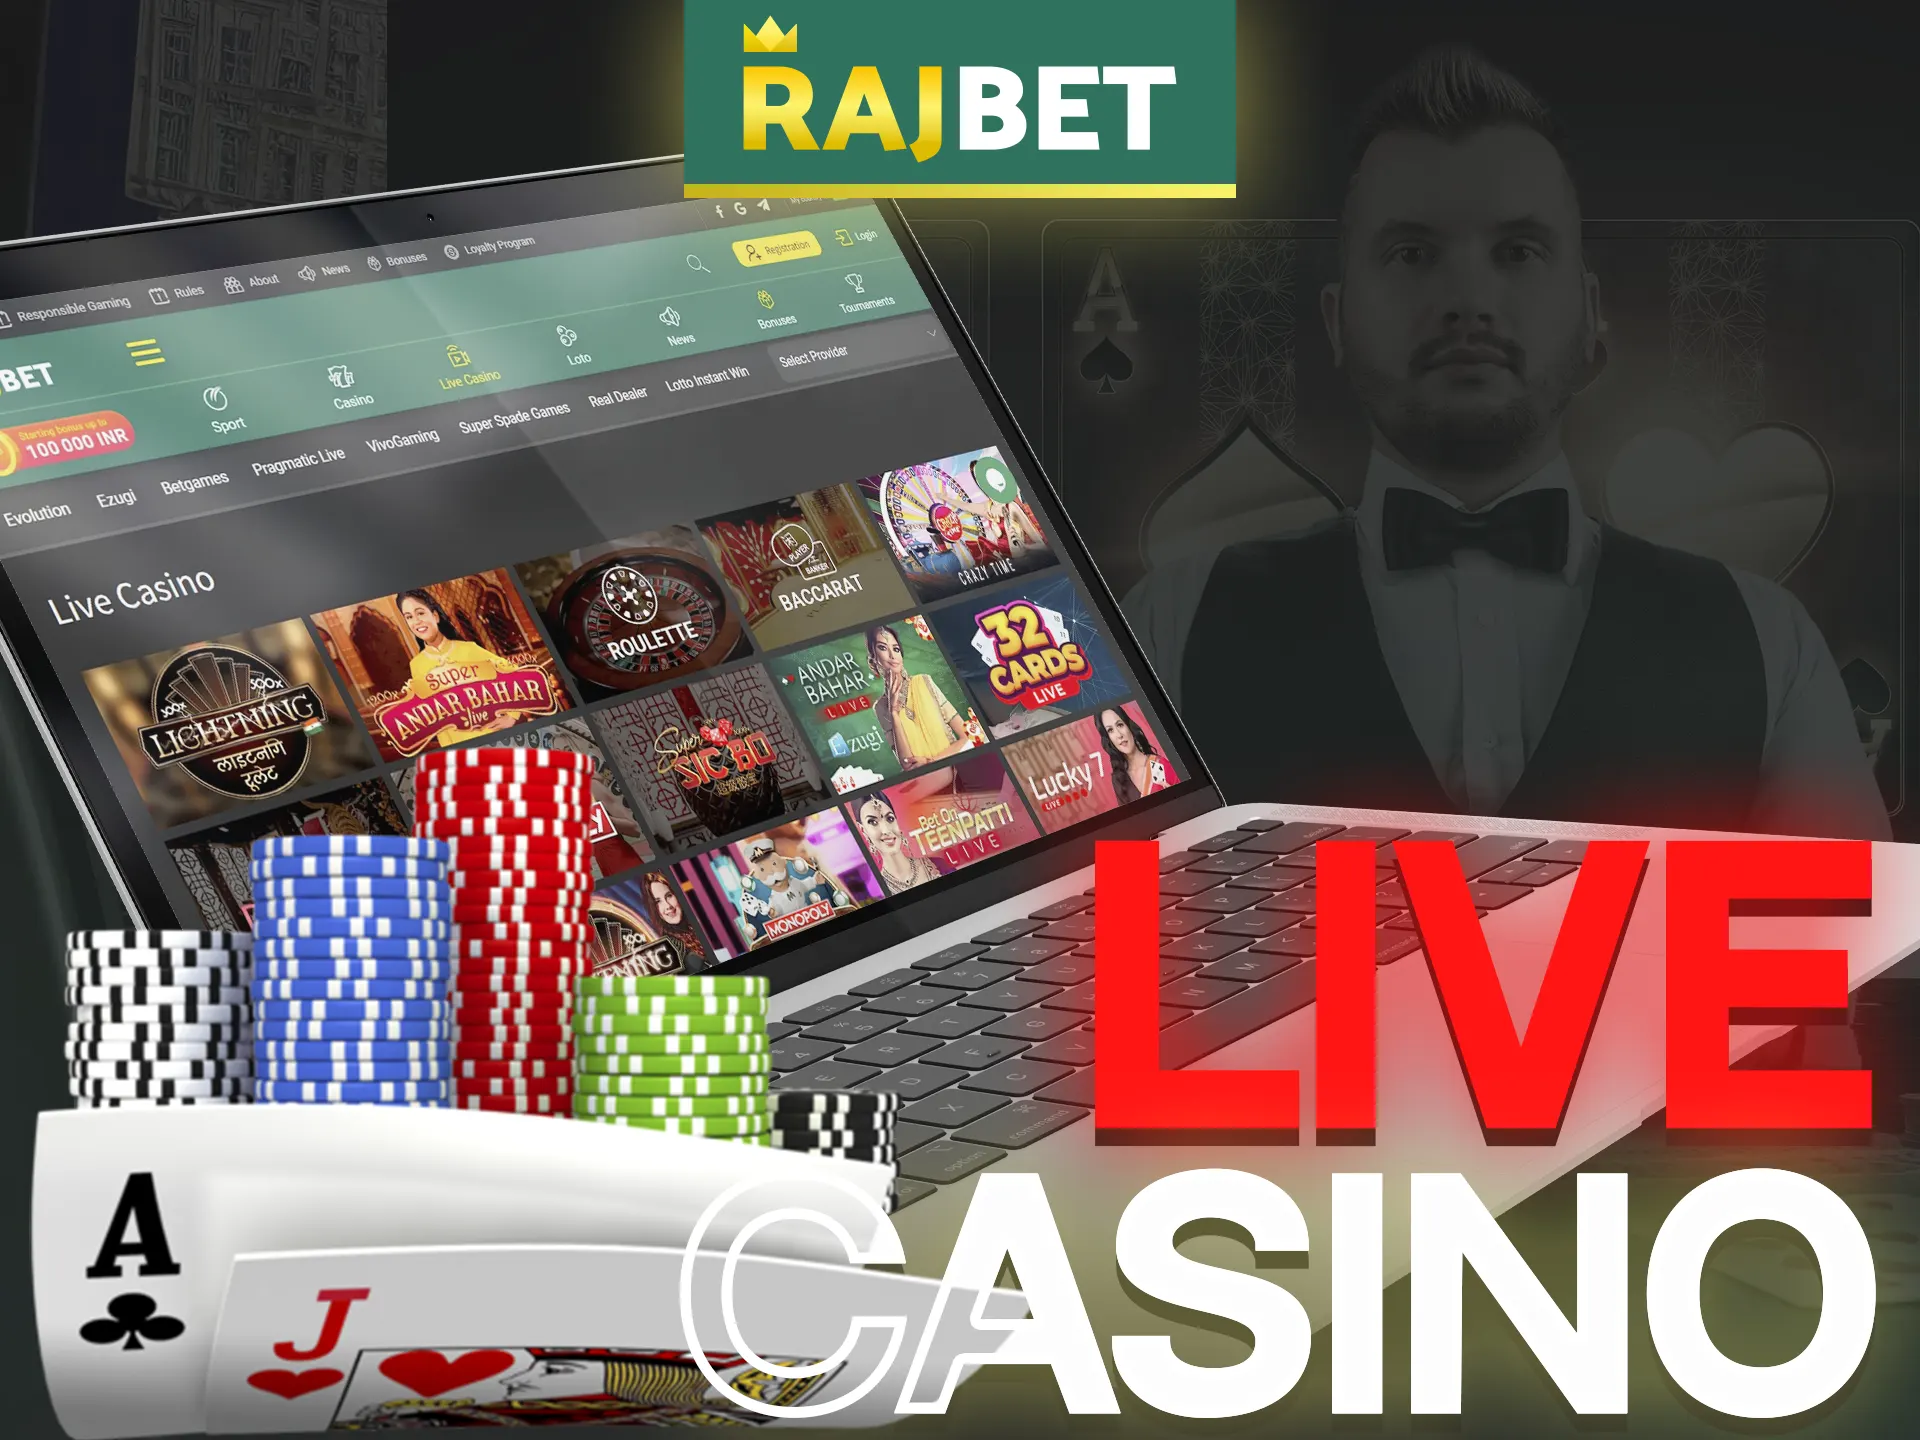 The live casino section will satisfy players of all levels.